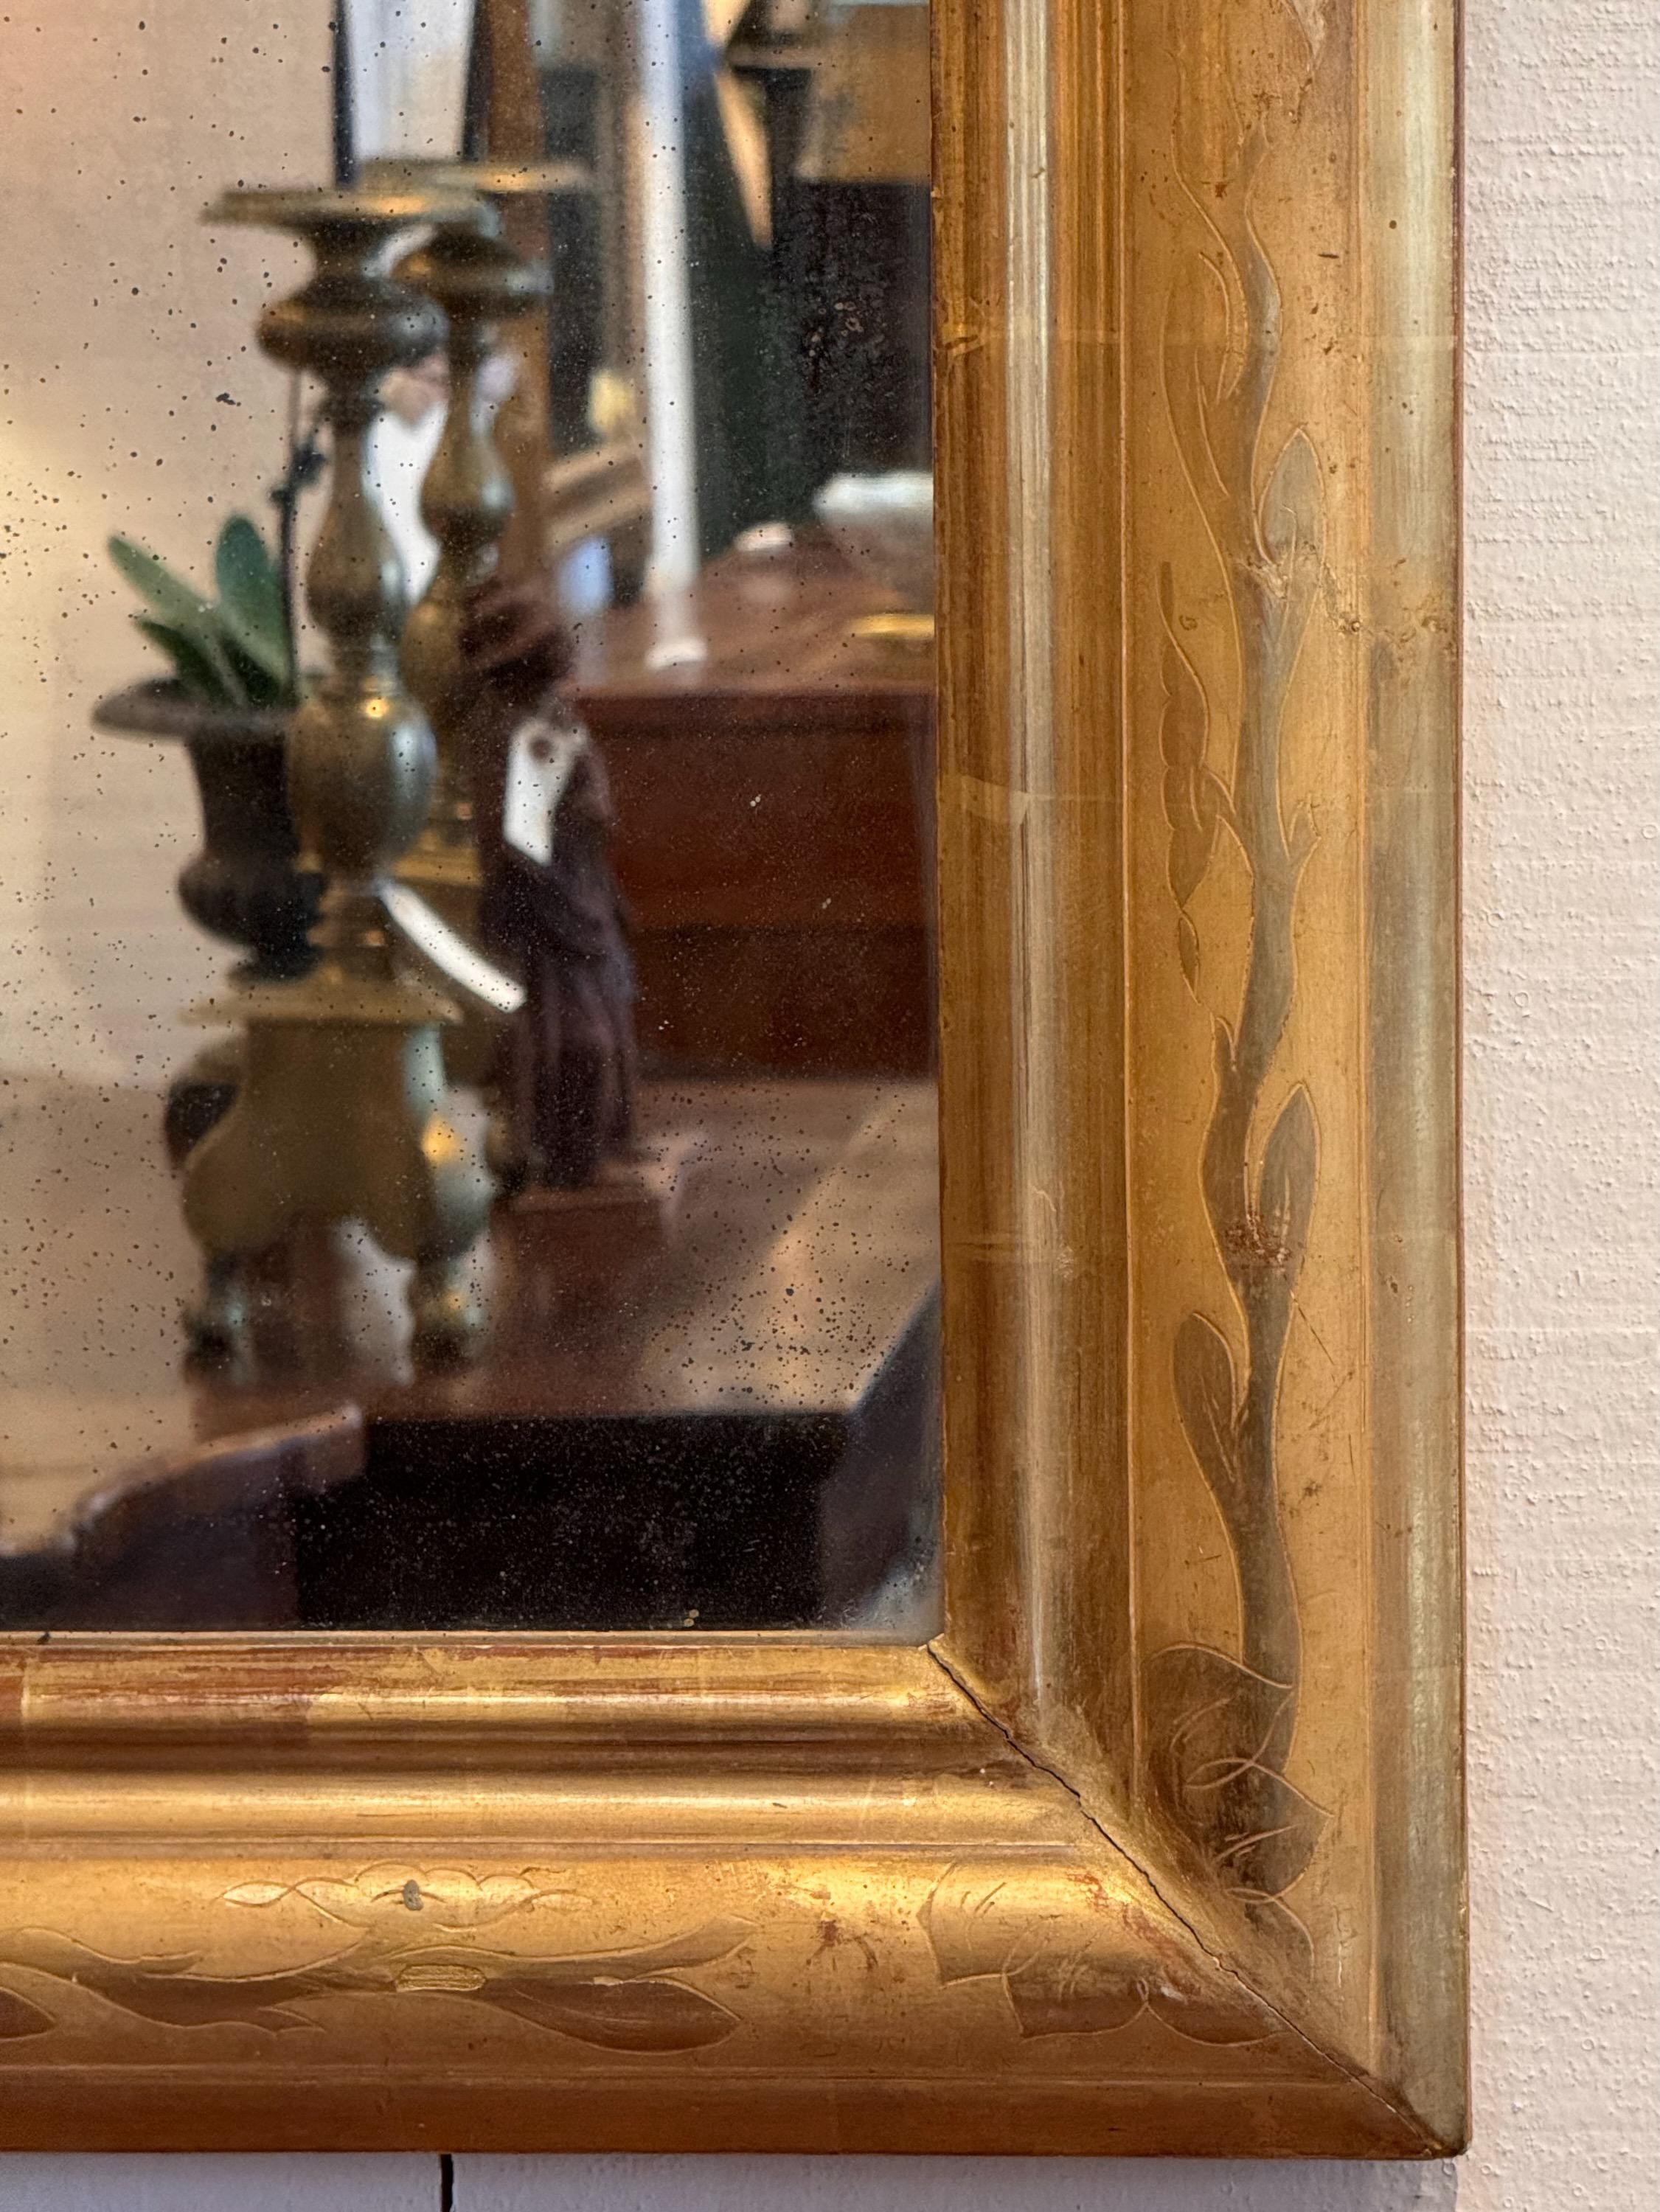 The style that works in any decor. Everyone loves Louis Phillippe mirrors. This is a great one.